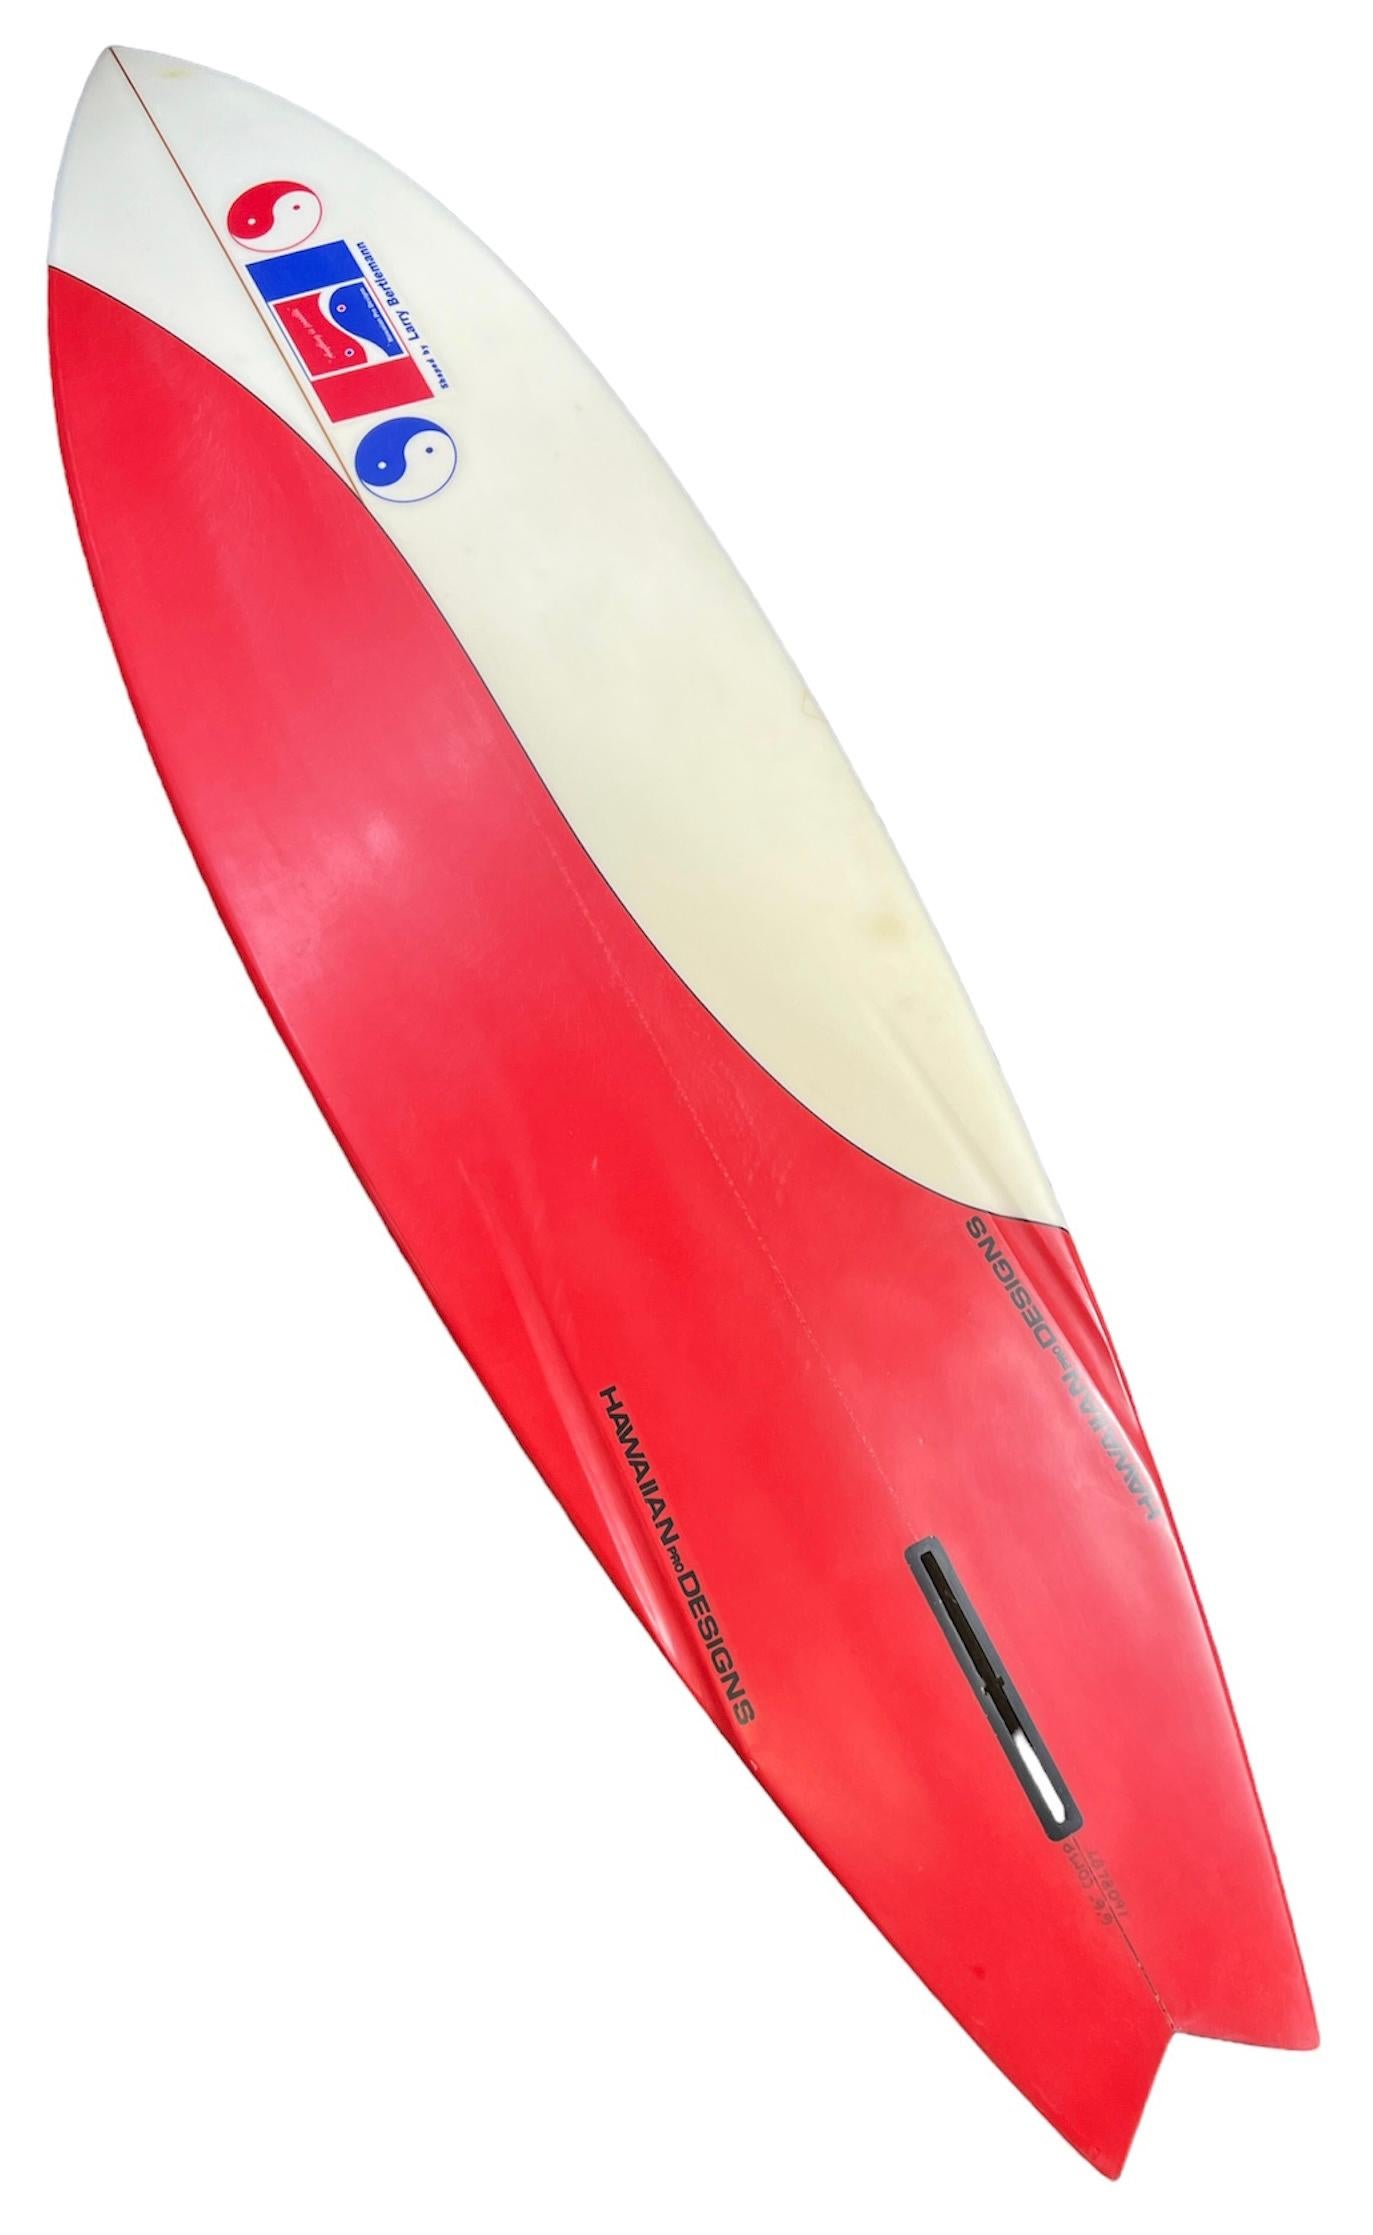 1978 Vintage Larry Bertlemann surfboard. Features Bertlemann’s signature color swirl design in red/white foam with black pinstriping. Signed by Larry Bertlemann. Bertlemann is a renowned surfing star and pioneer of surfing maneuvers hailing from